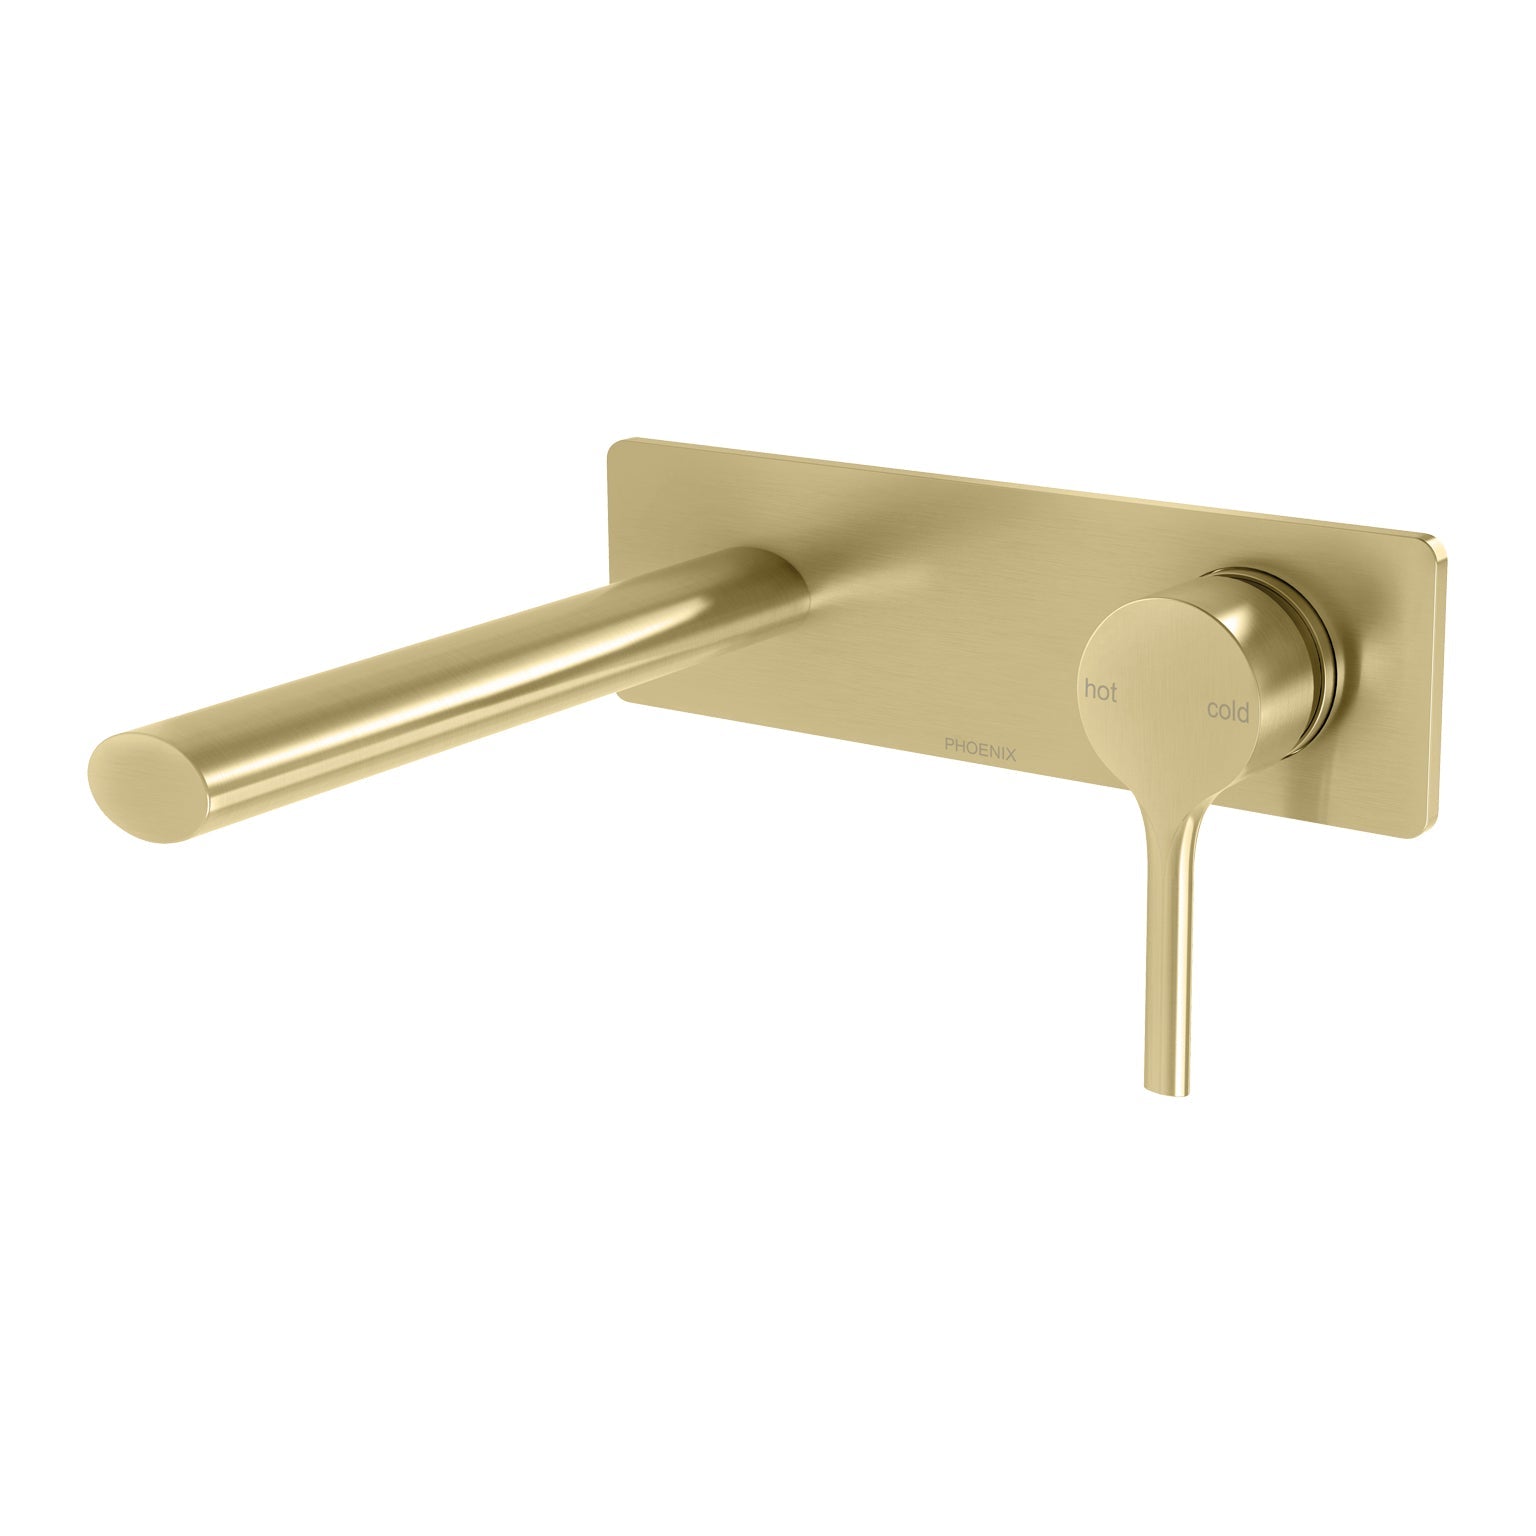 PHOENIX VIVID SLIMLINE OVAL SWITCHMIX WALL BASIN / BATH MIXER SET FIT-OFF AND ROUGH-IN KIT 175MM BRUSHED GOLD